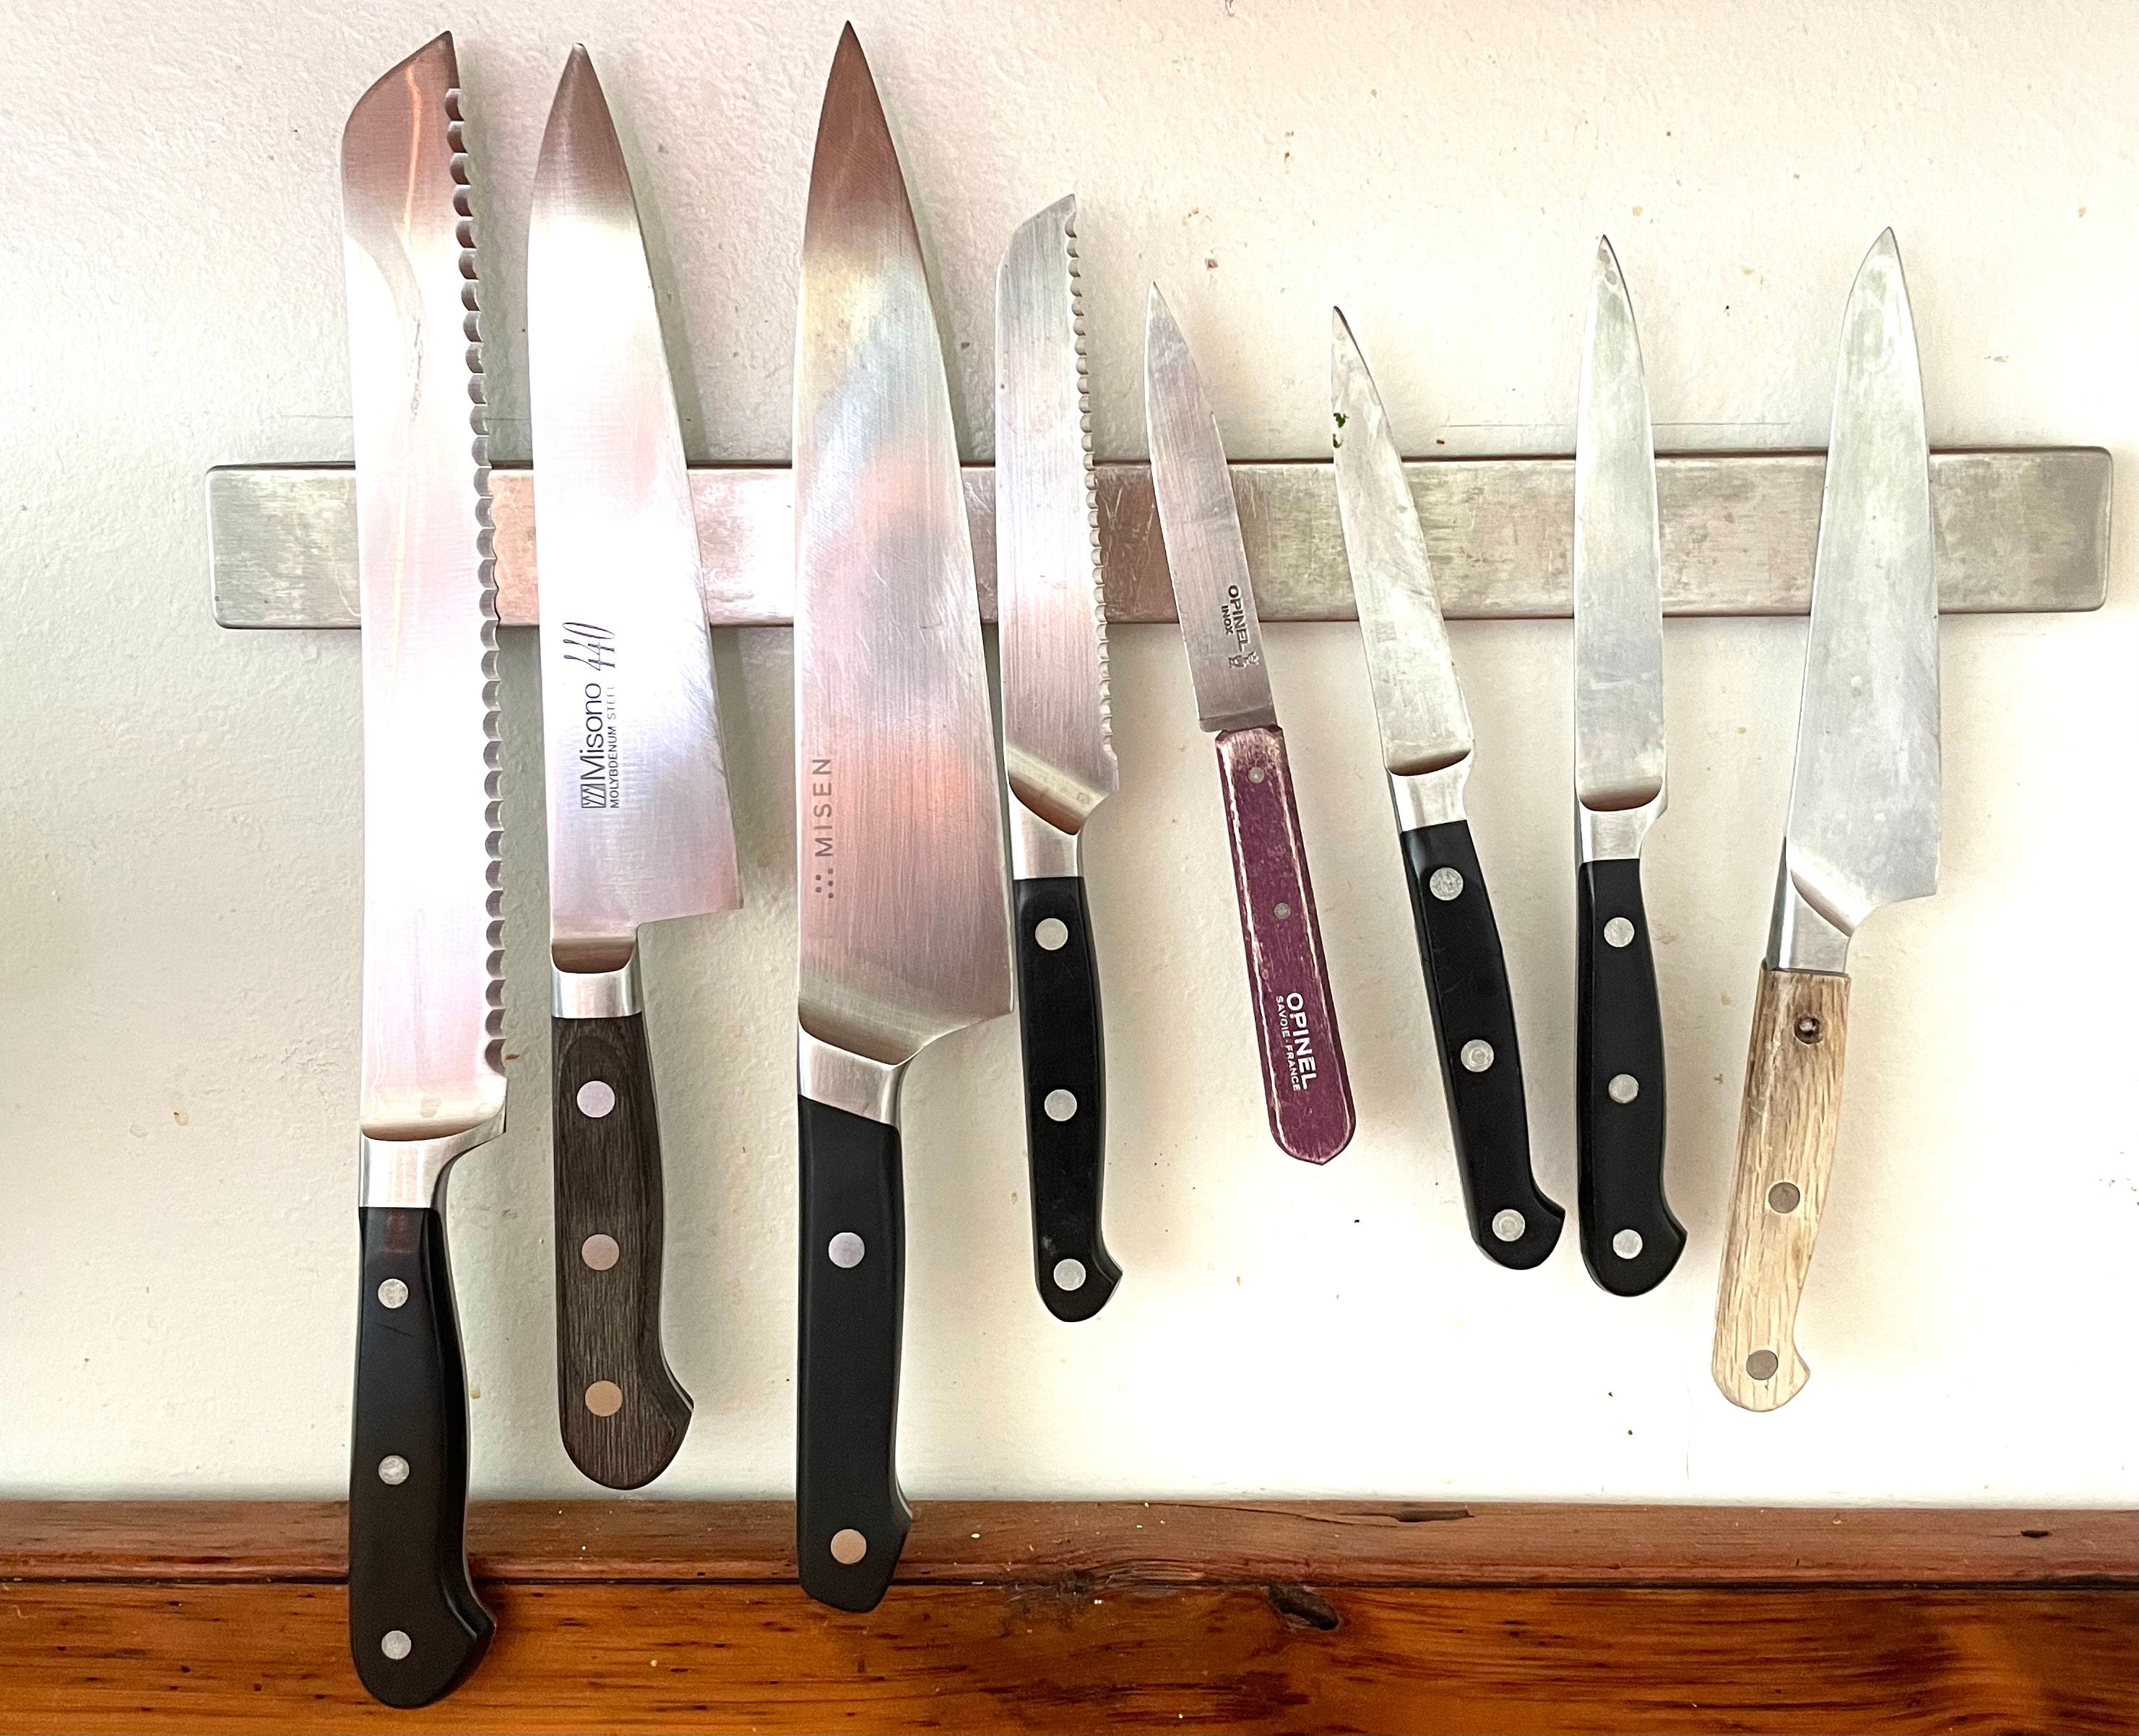 Thoughts on Knives - by Julia Turshen - Keep Calm & Cook On